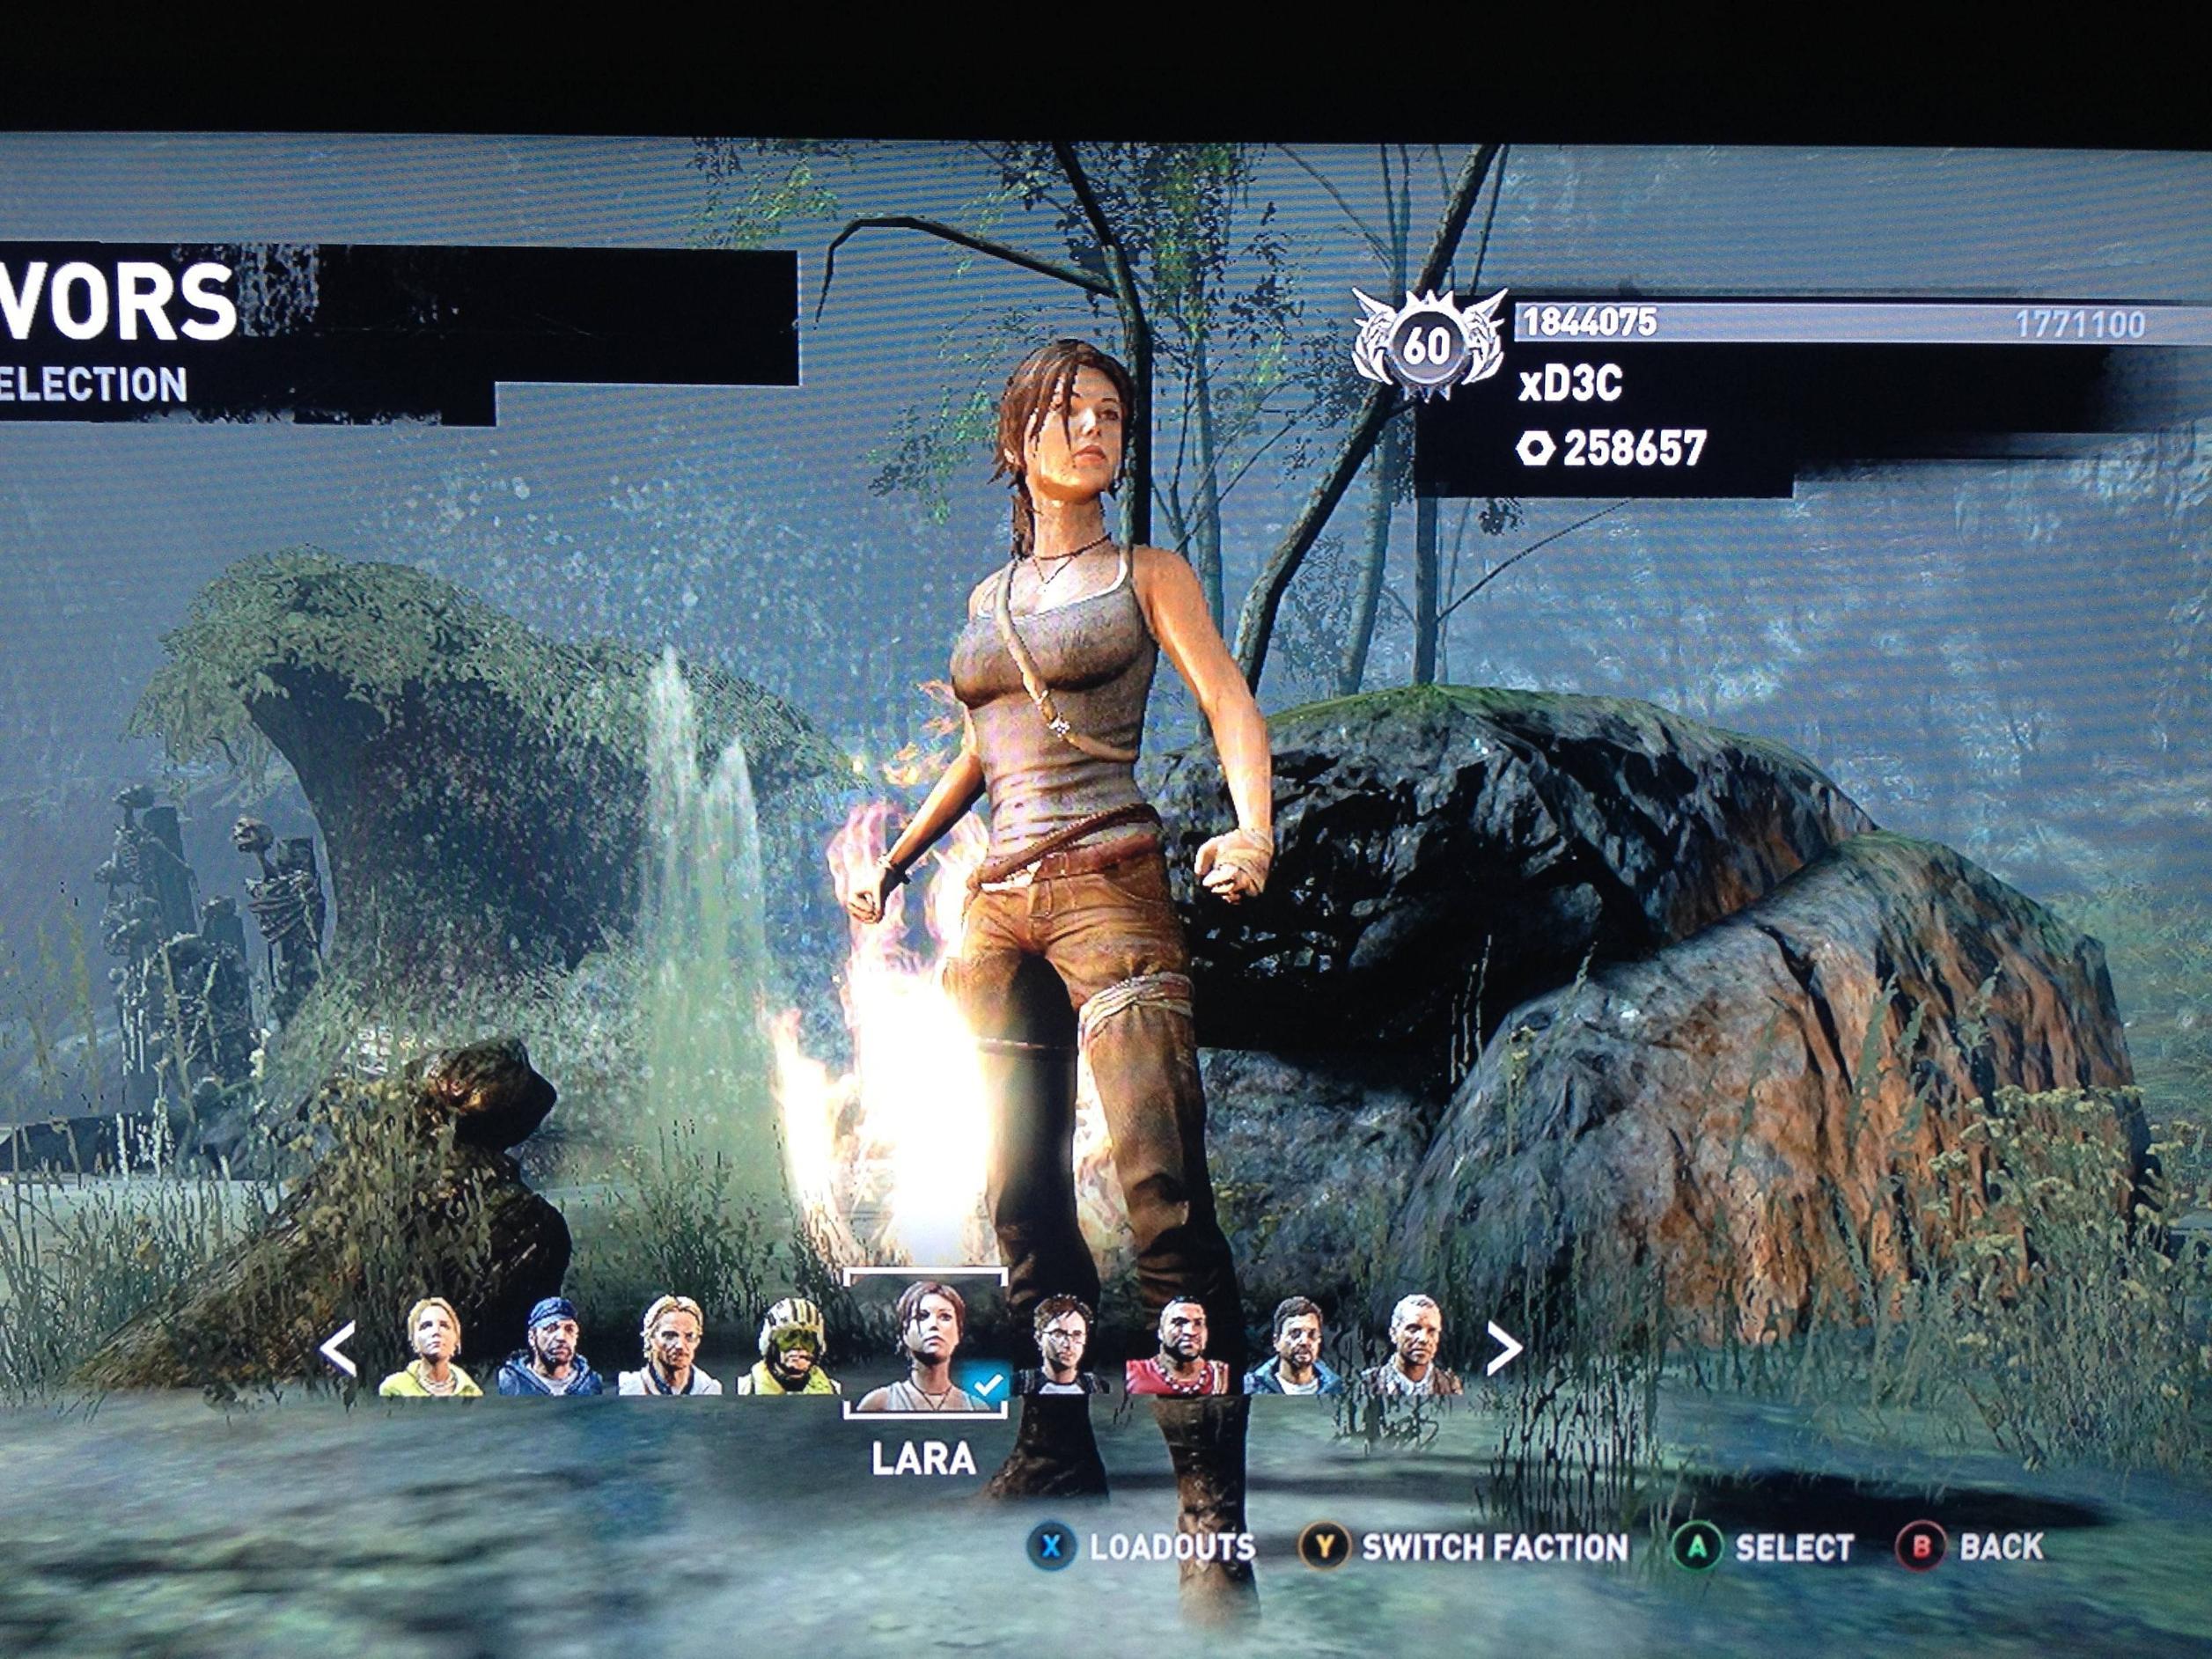 david geraghty recommends tomb raider nude skin pic